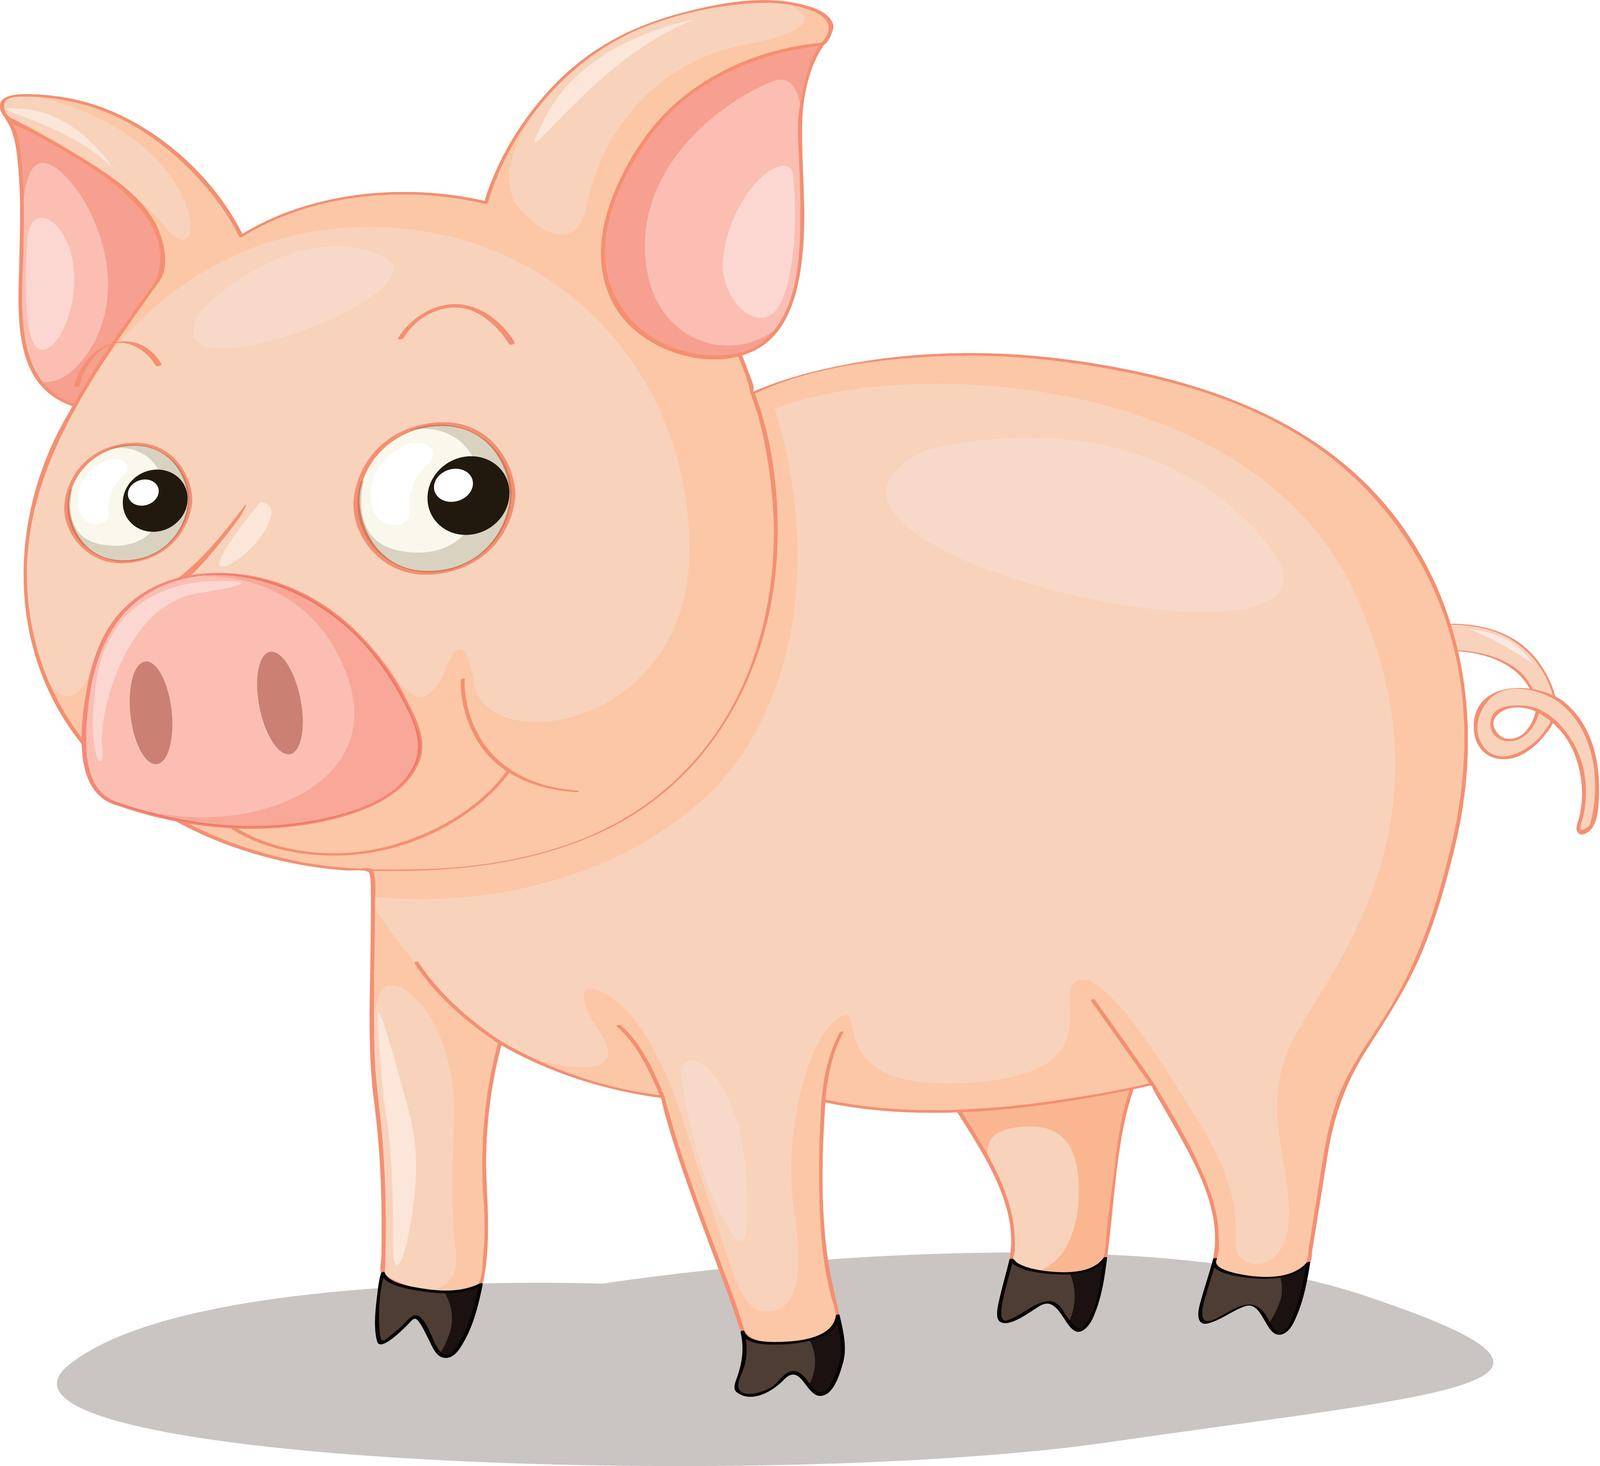 Illustration of a cute pig on white